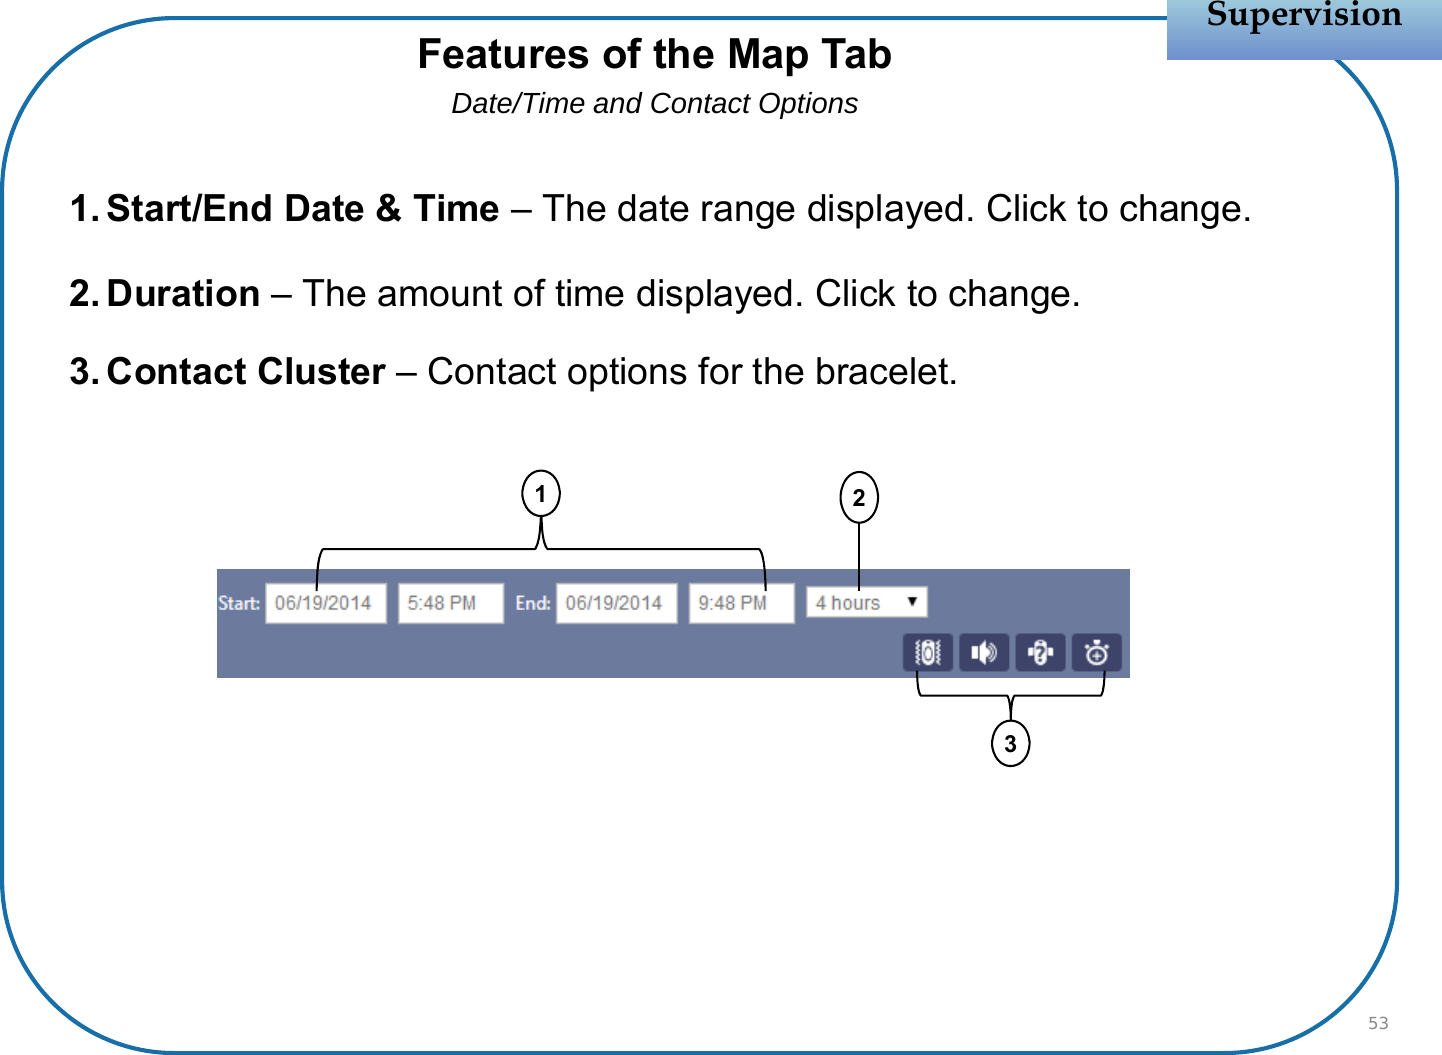 1. Start/End Date &amp; Time – The date range displayed. Click to change.2. Duration – The amount of time displayed. Click to change.3. Contact Cluster – Contact options for the bracelet.SupervisionSupervision53Features of the Map TabDate/Time and Contact Options231